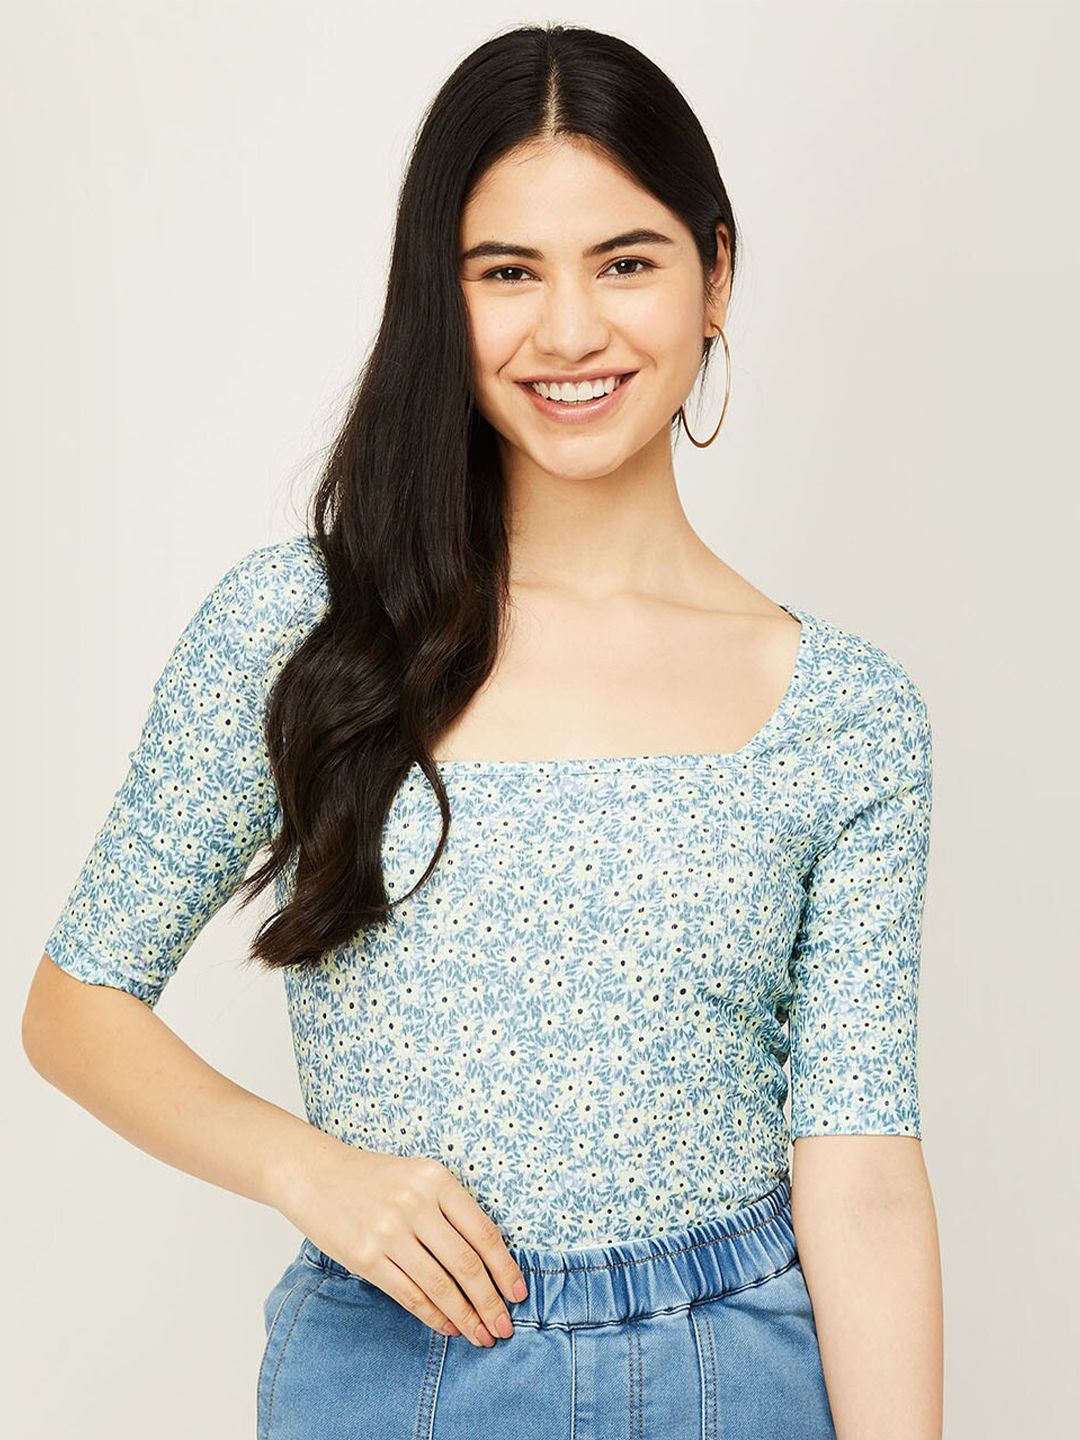 Ginger by Lifestyle Blue & White Floral Printed Crop Top Price in India